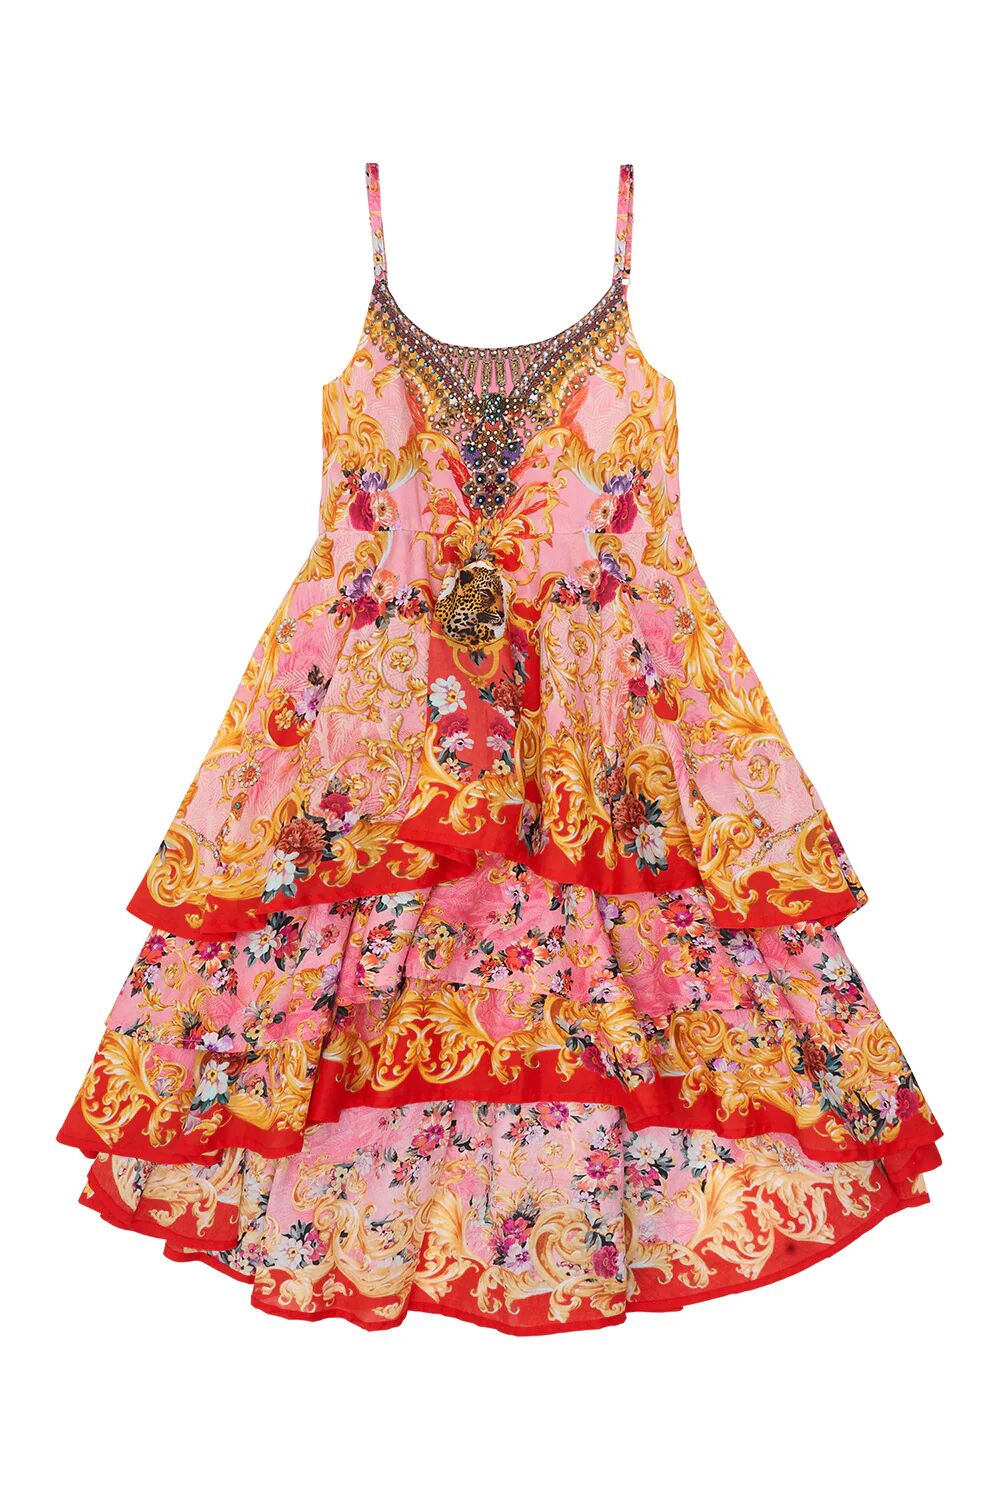 Camilla eBoutique Kids Layered Dress 12-14 Diaries of a Diva, 12  - Size: 12